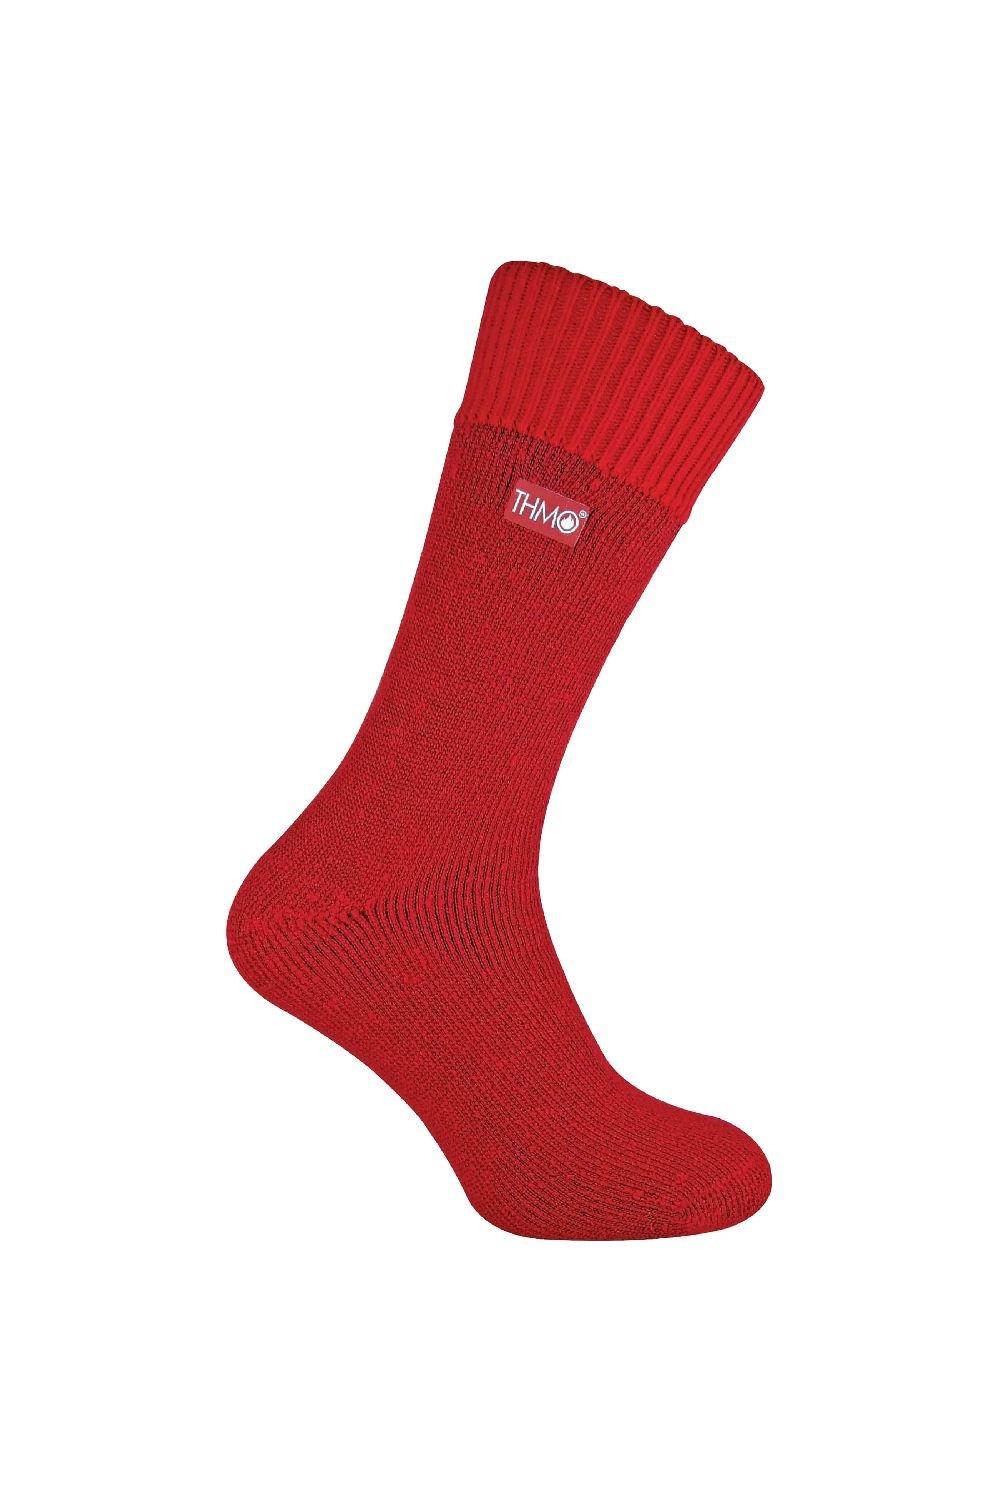 Thick Fleece Lined Warm Thermal Socks for Winter